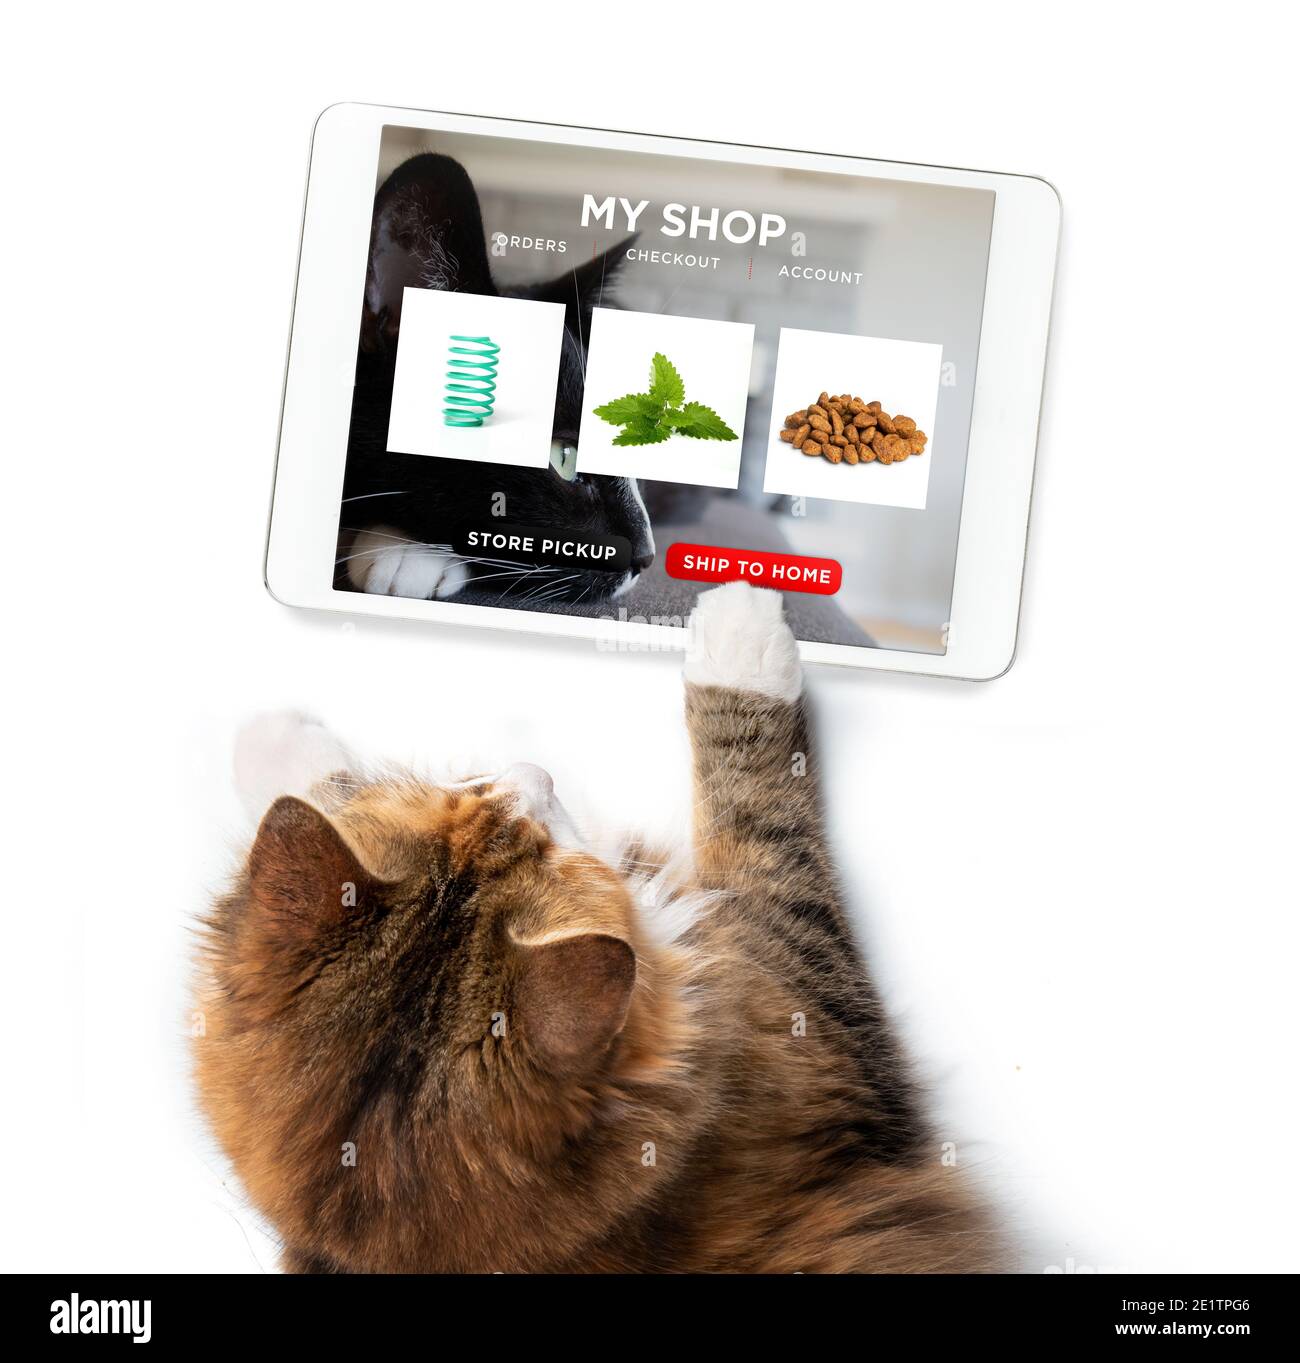 Cat ordering online by internet for home delivery. Paw on tablet with a shopping product selection. Concept for pets using technology. Stock Photo